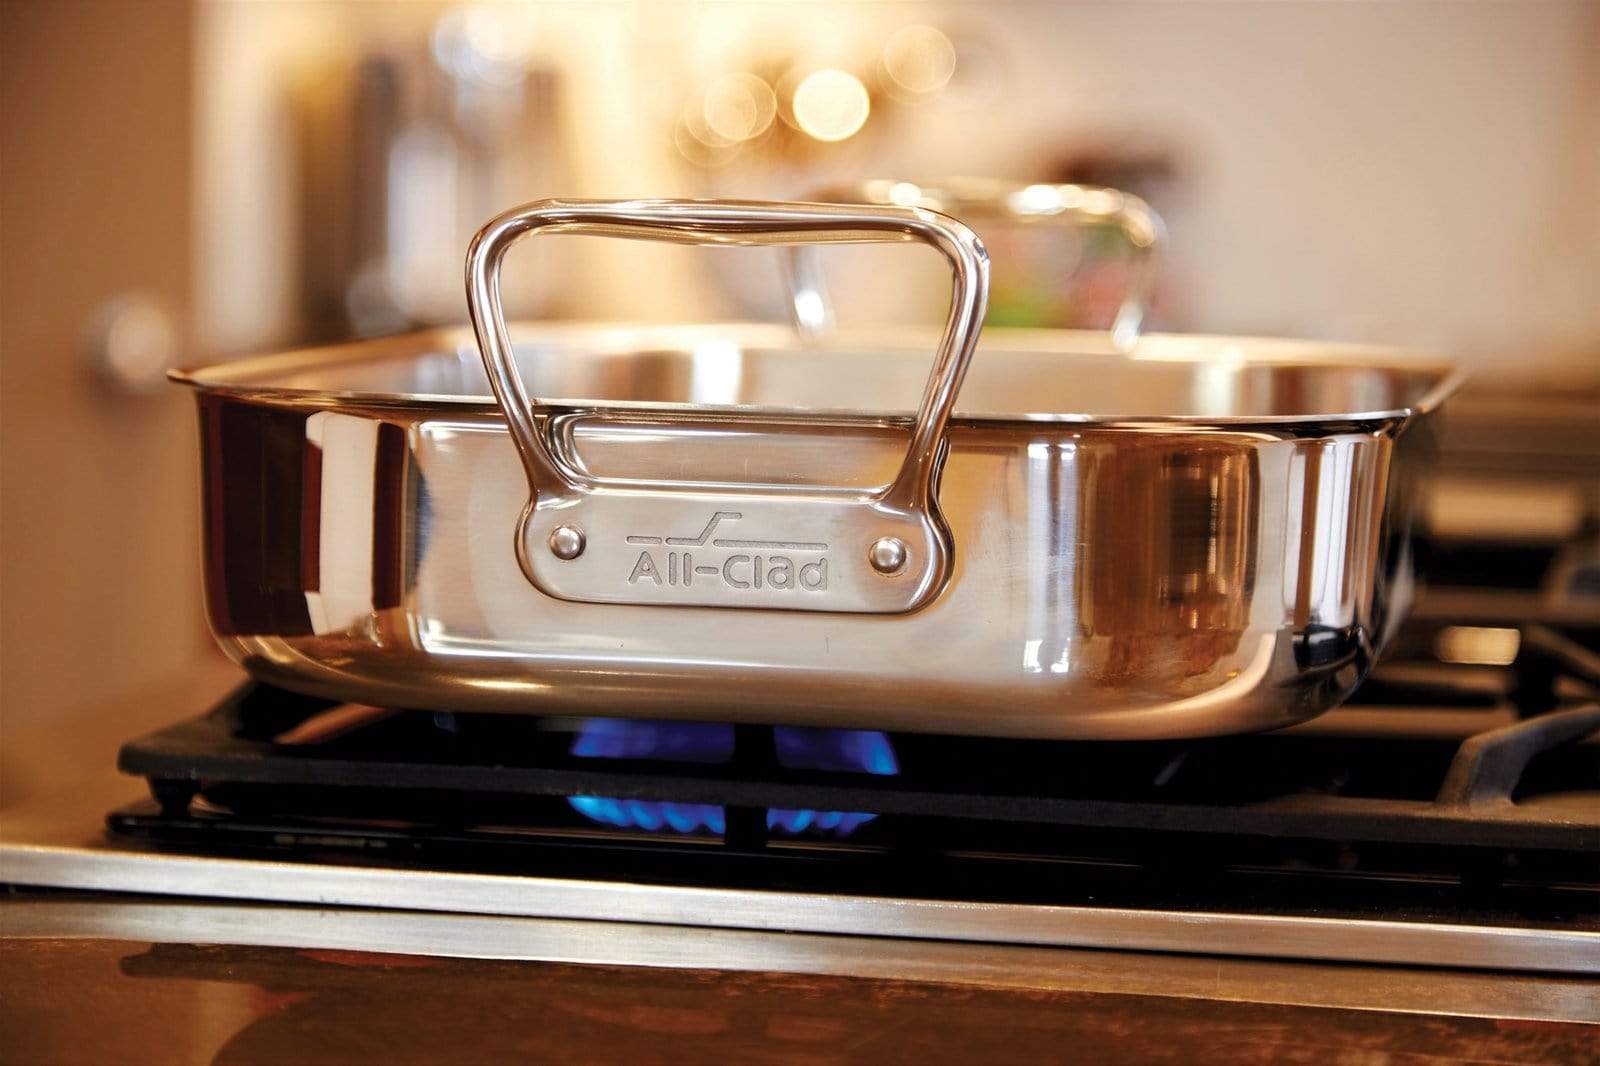 All-Clad Specialty Stainless Steel Kitchen Gadgets